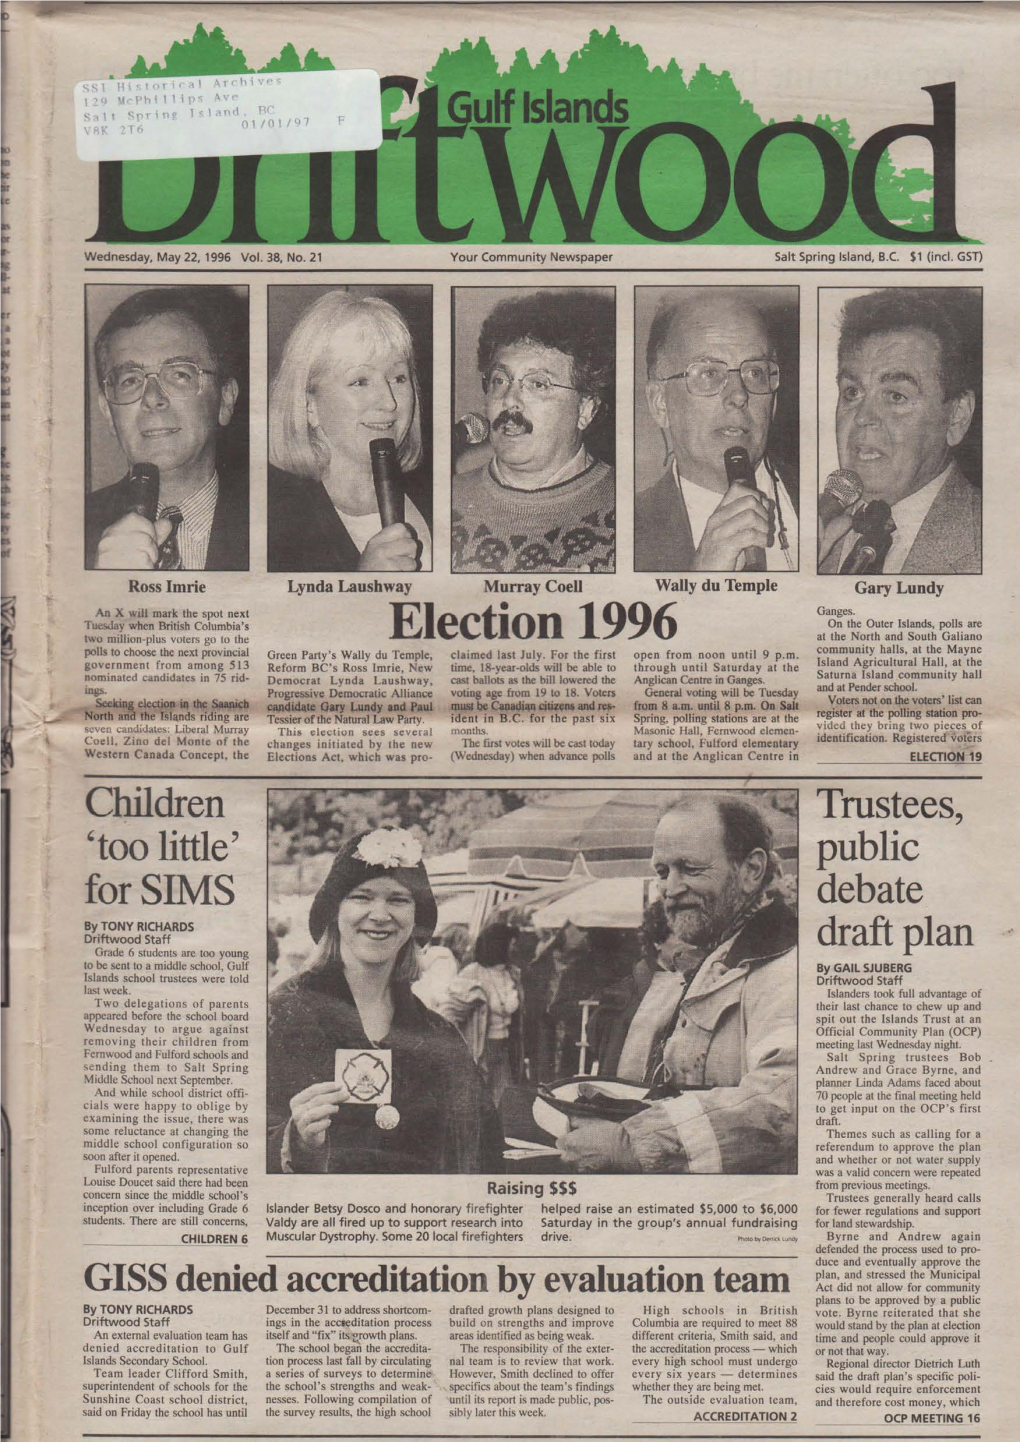 Election 1996 at the North and South Galiano Community Halls, at the Mayne Poll to Choose the Next Provincial Green Party's Wally Du Temple, Claim D Ia T July